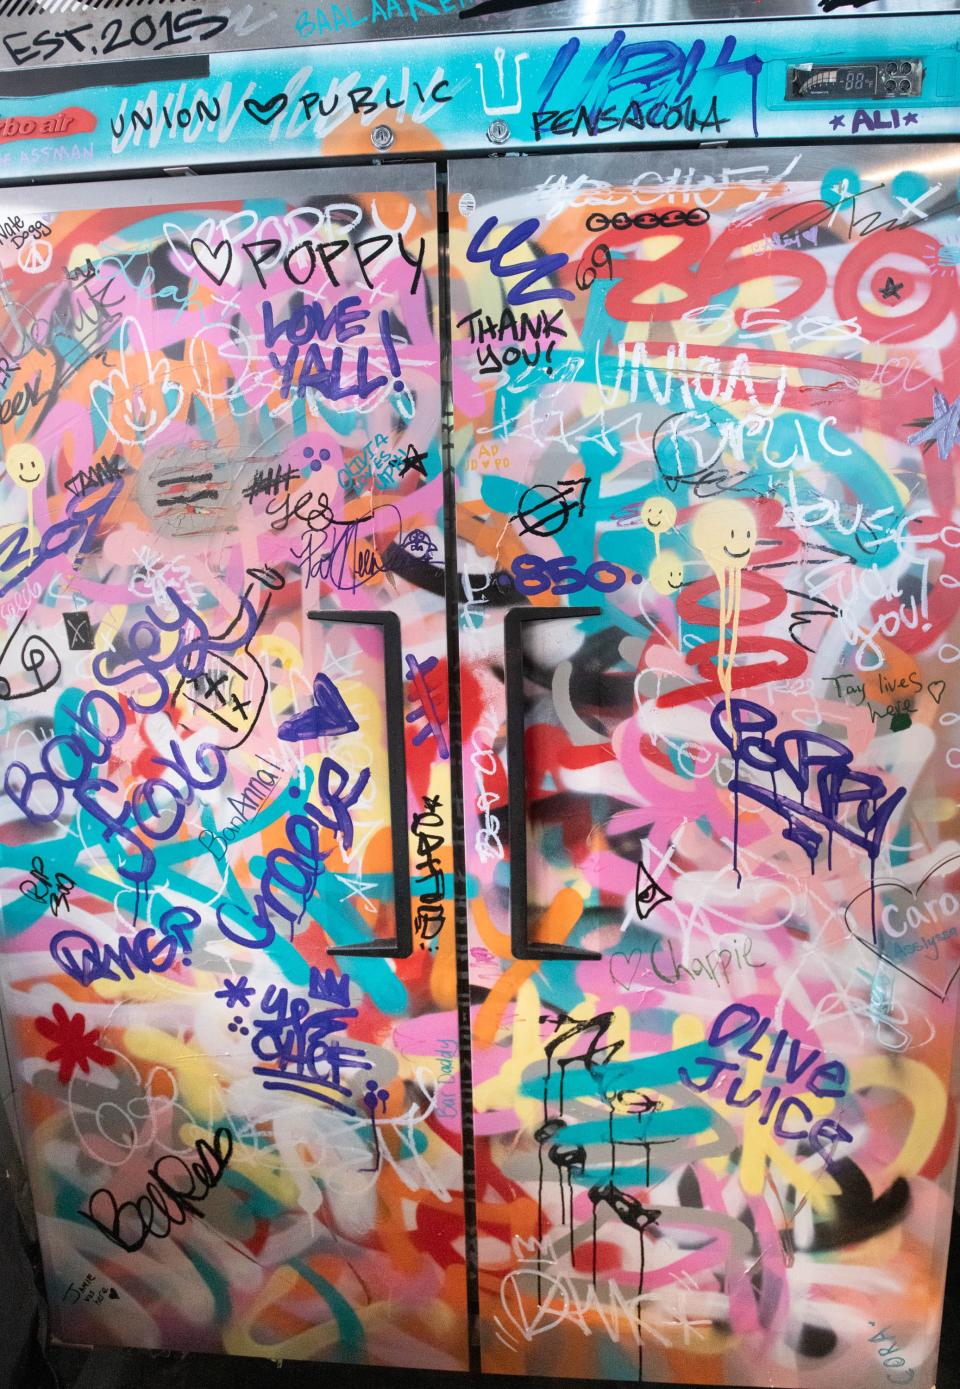 A graffiti refrigerator at the new location of the Union Public House at 36 East Garden Street in Pensacola on Friday, Aug, 25, 2023.